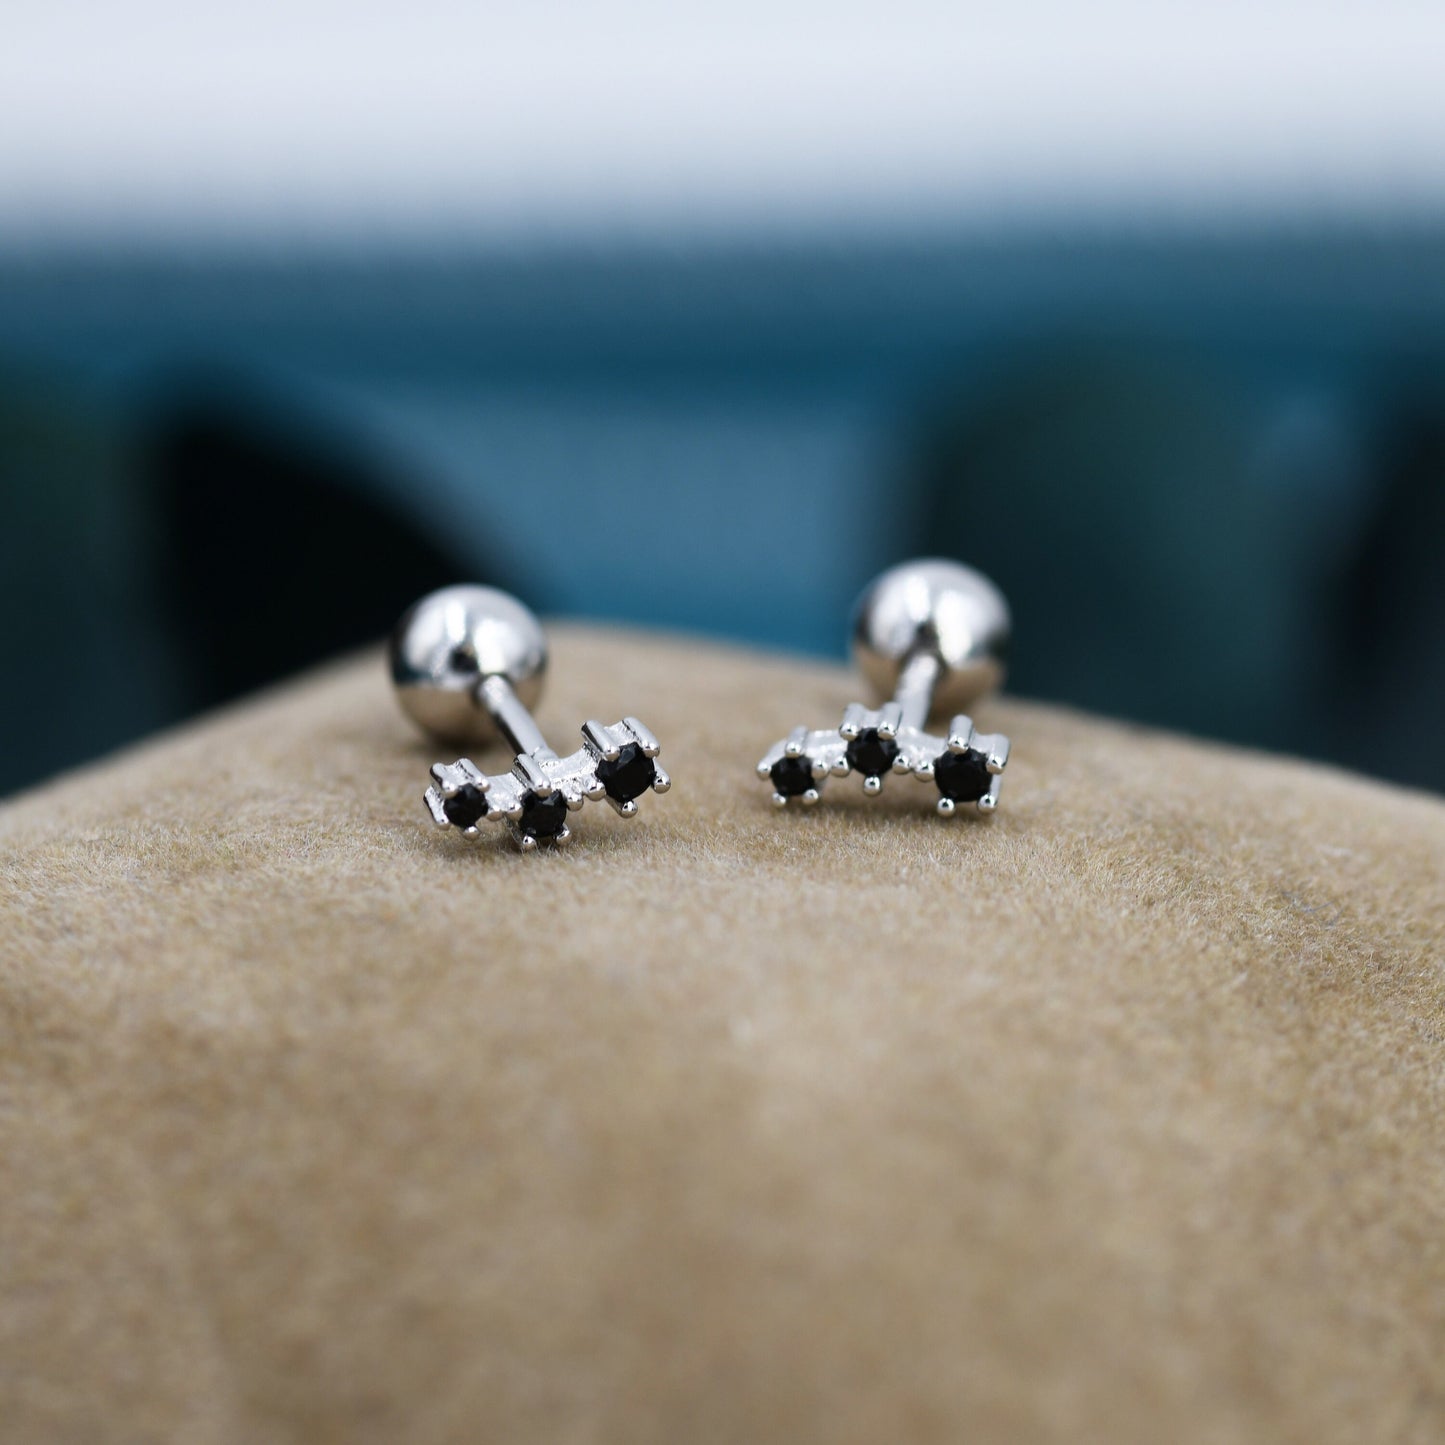 Tiny Black CZ Trio Screw Back Earrings in Sterling Silver, Silver or Gold, Tiny Three Star CZ Barbell Earrings, Stacking Earrings